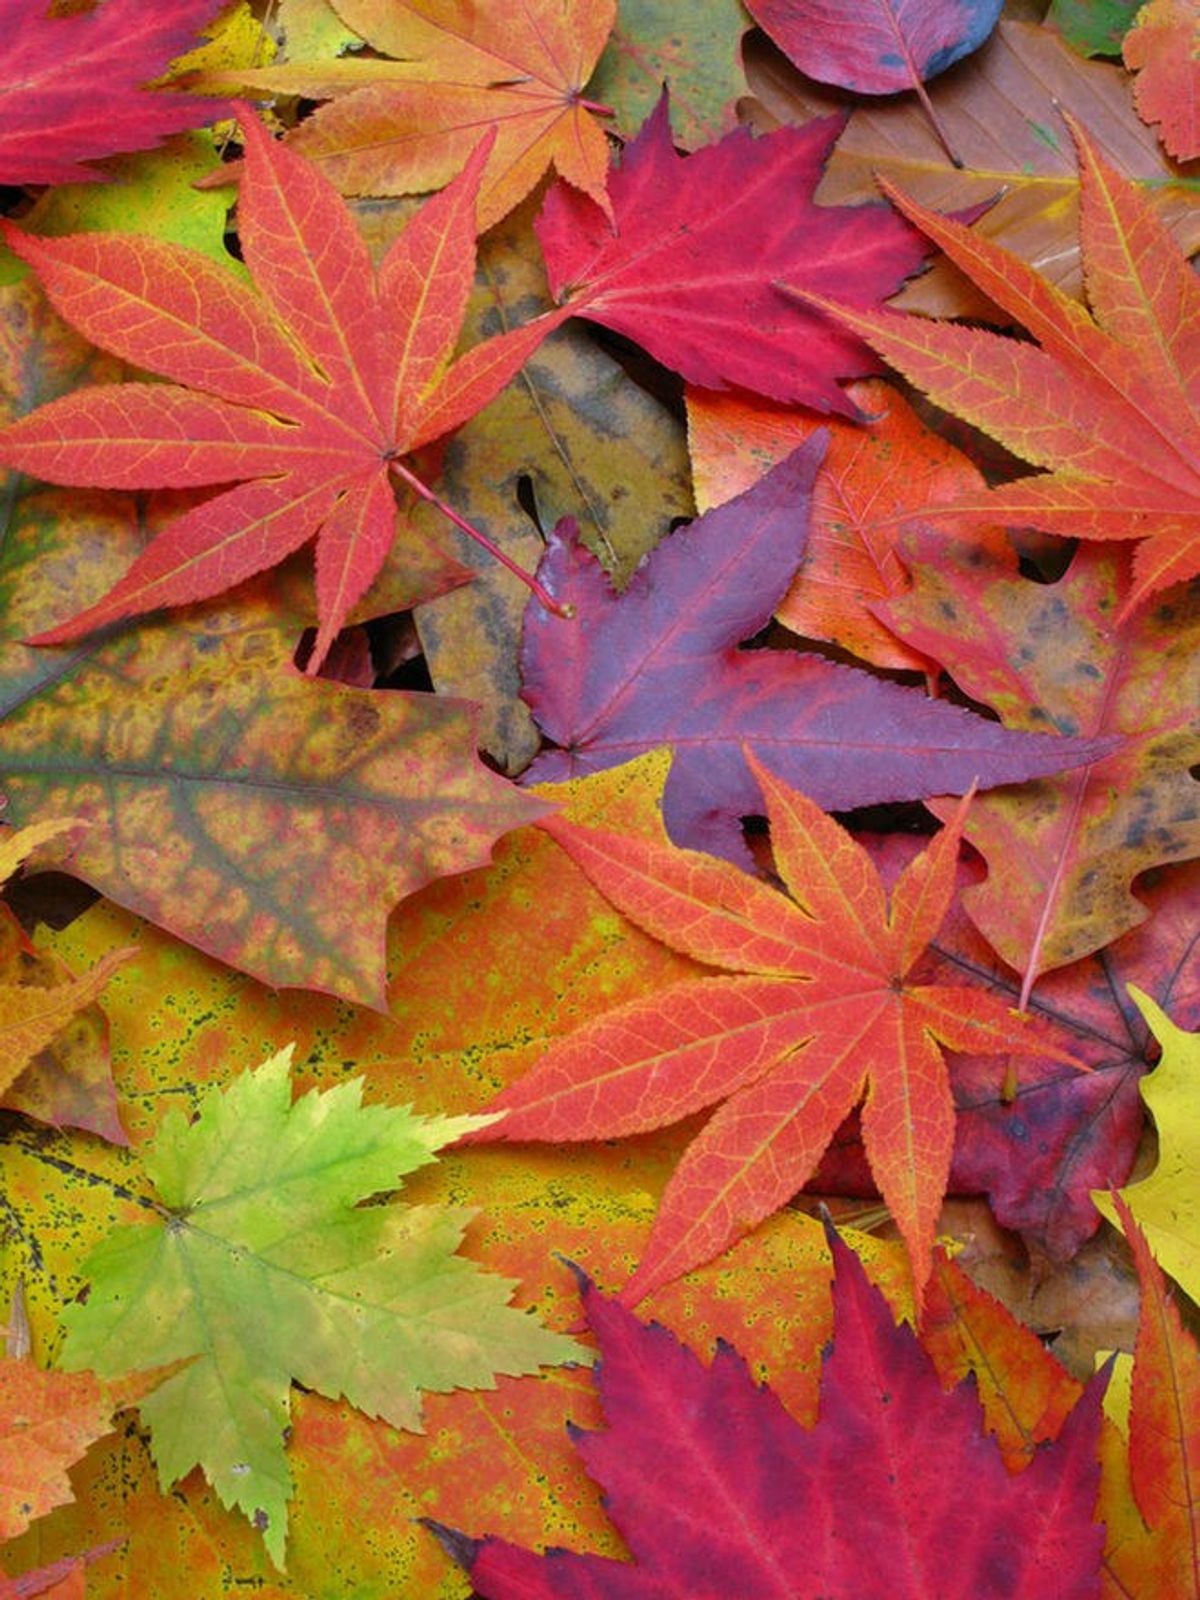 16 Reasons Why Fall Is The Best Season